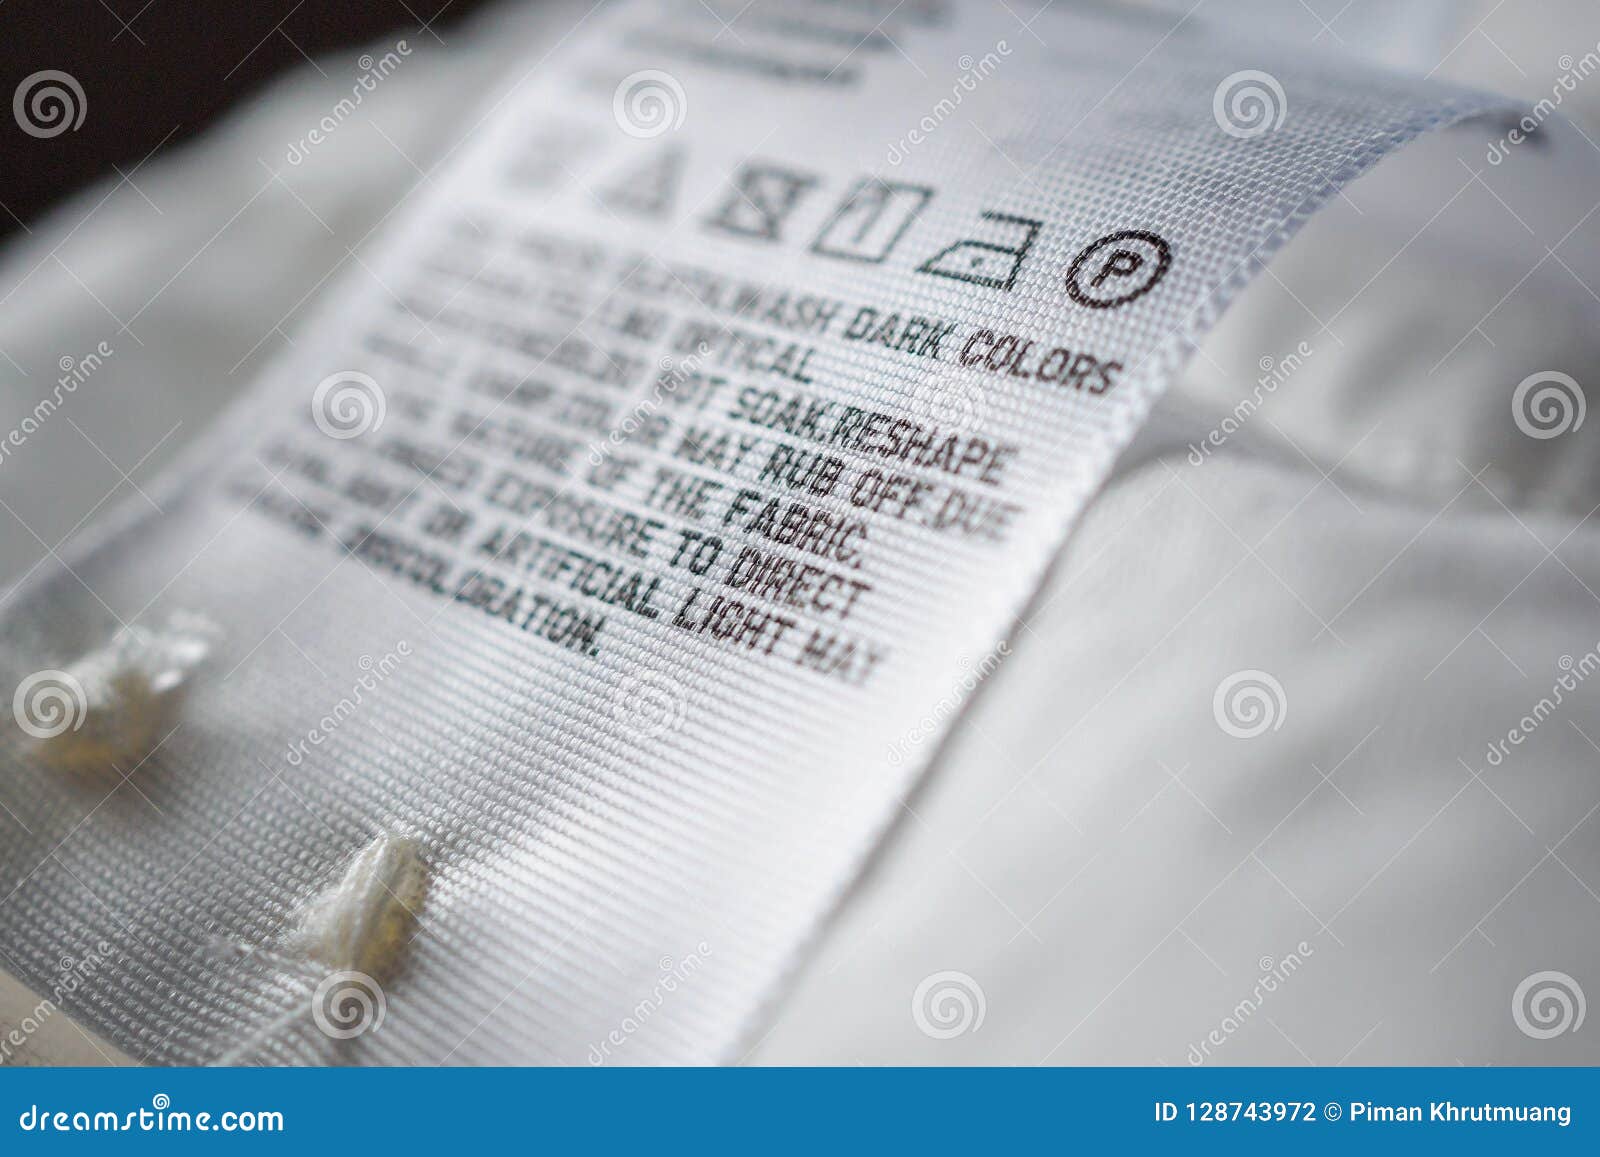 Cloth Label Tag with Laundry Care Instructions Stock Photo - Image of ...